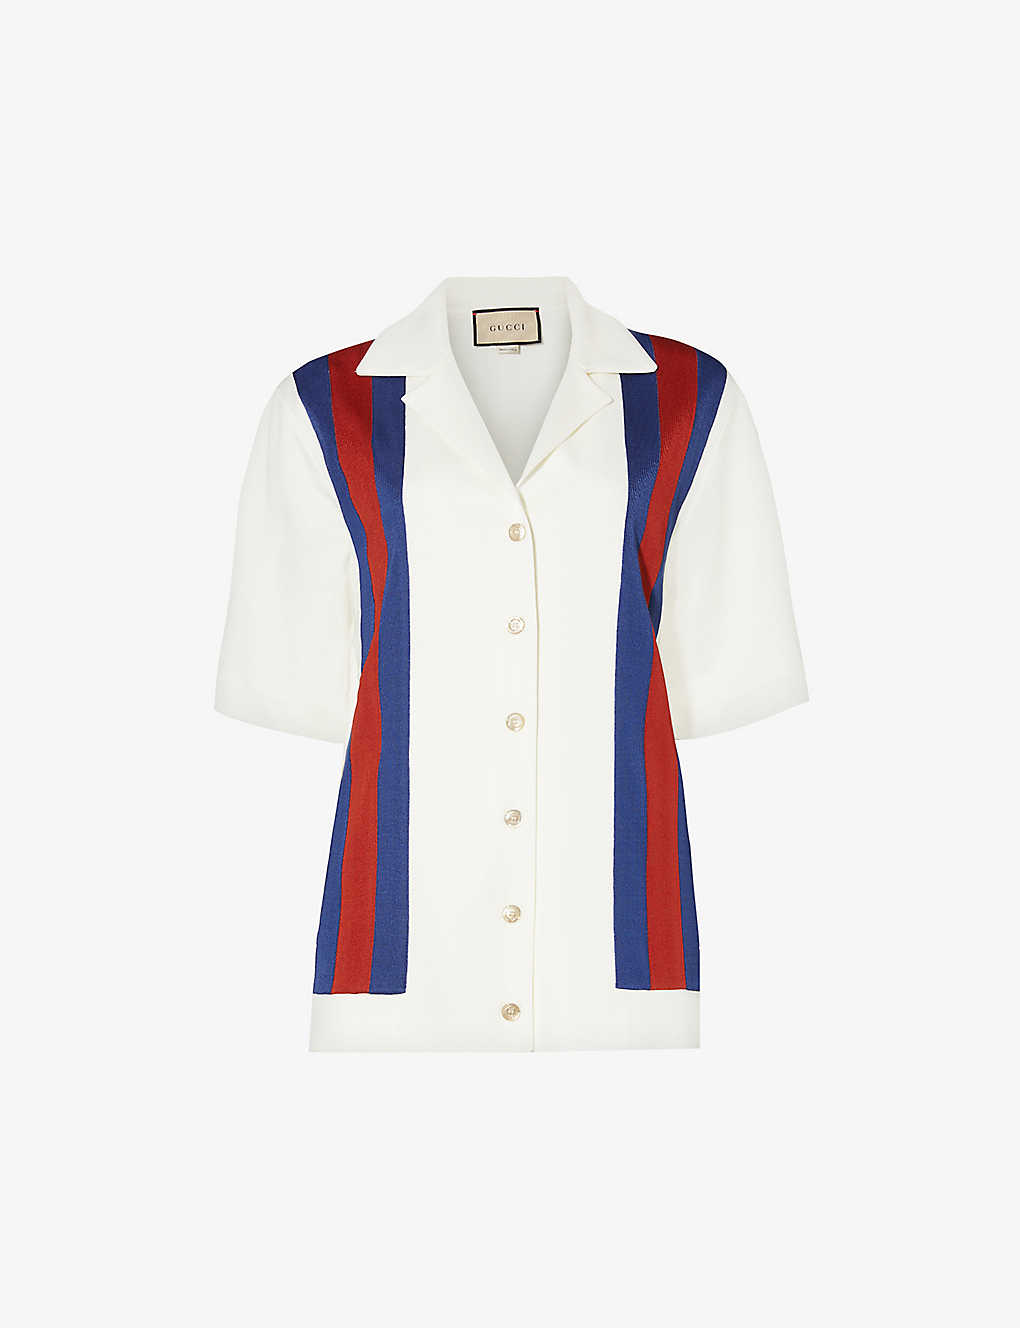 Gucci Striped-panel Knitted Polo Shirt In Ivory/blue/red